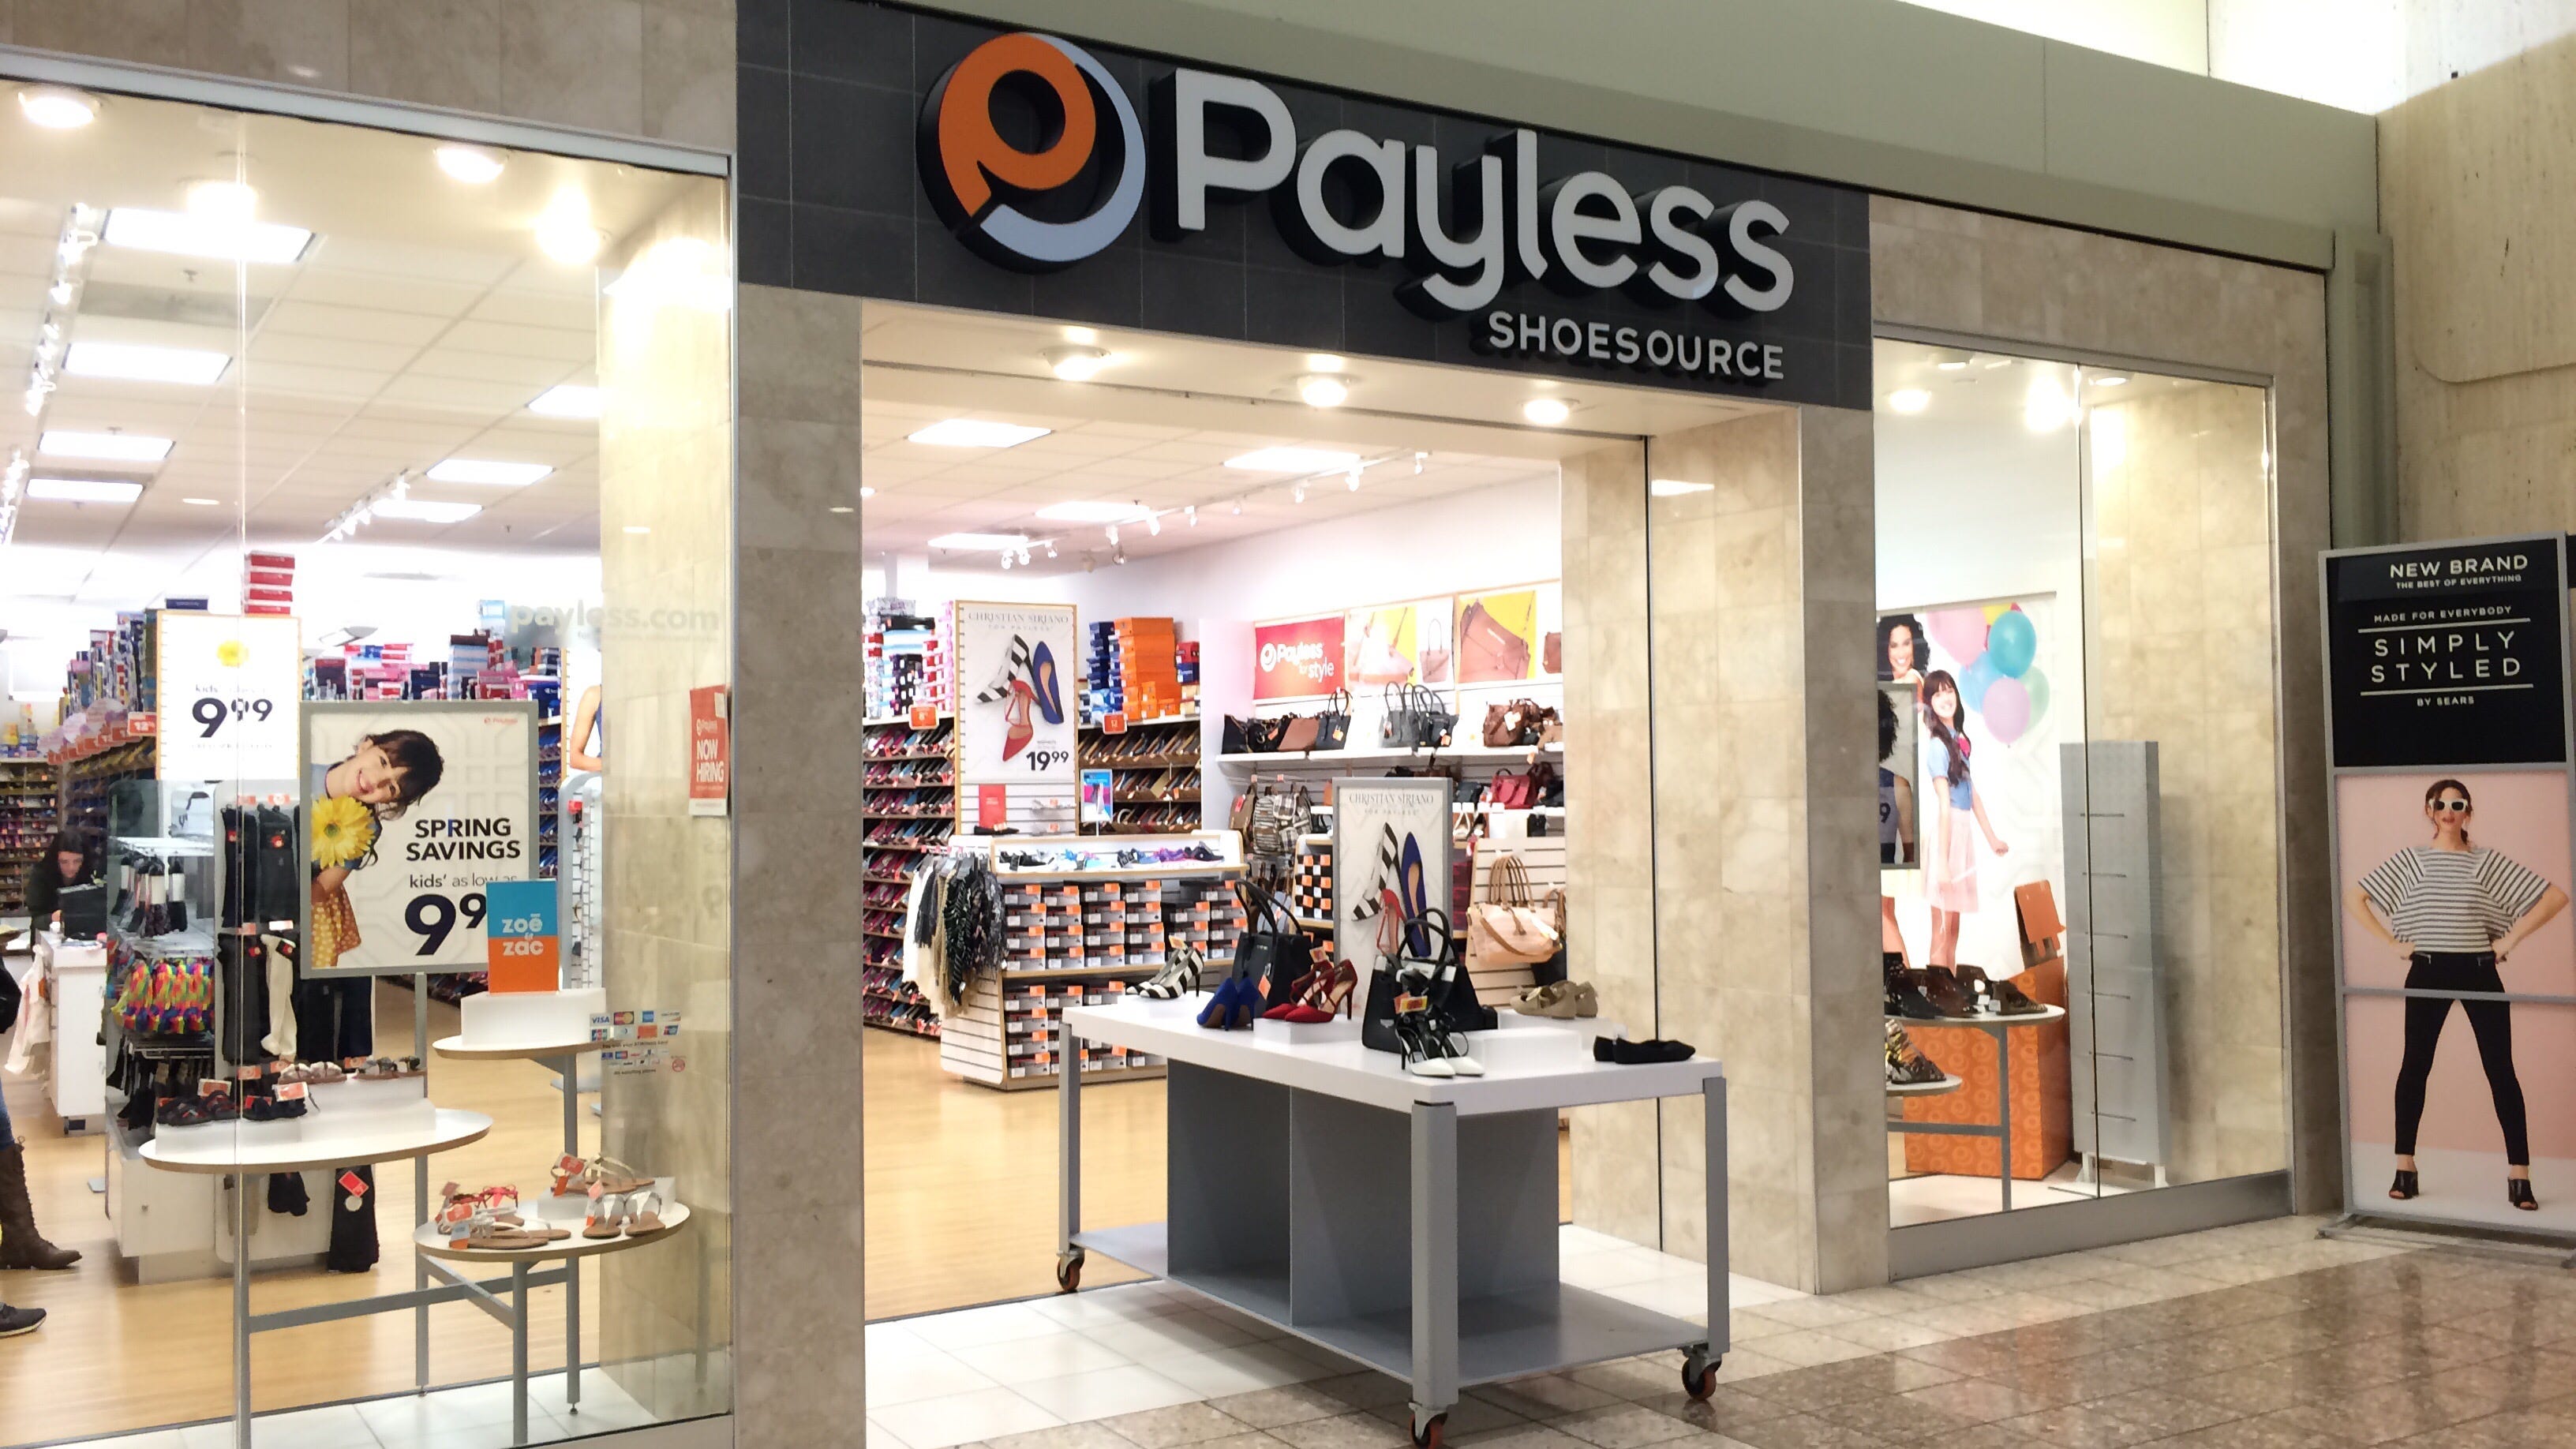 payless stores that are still open